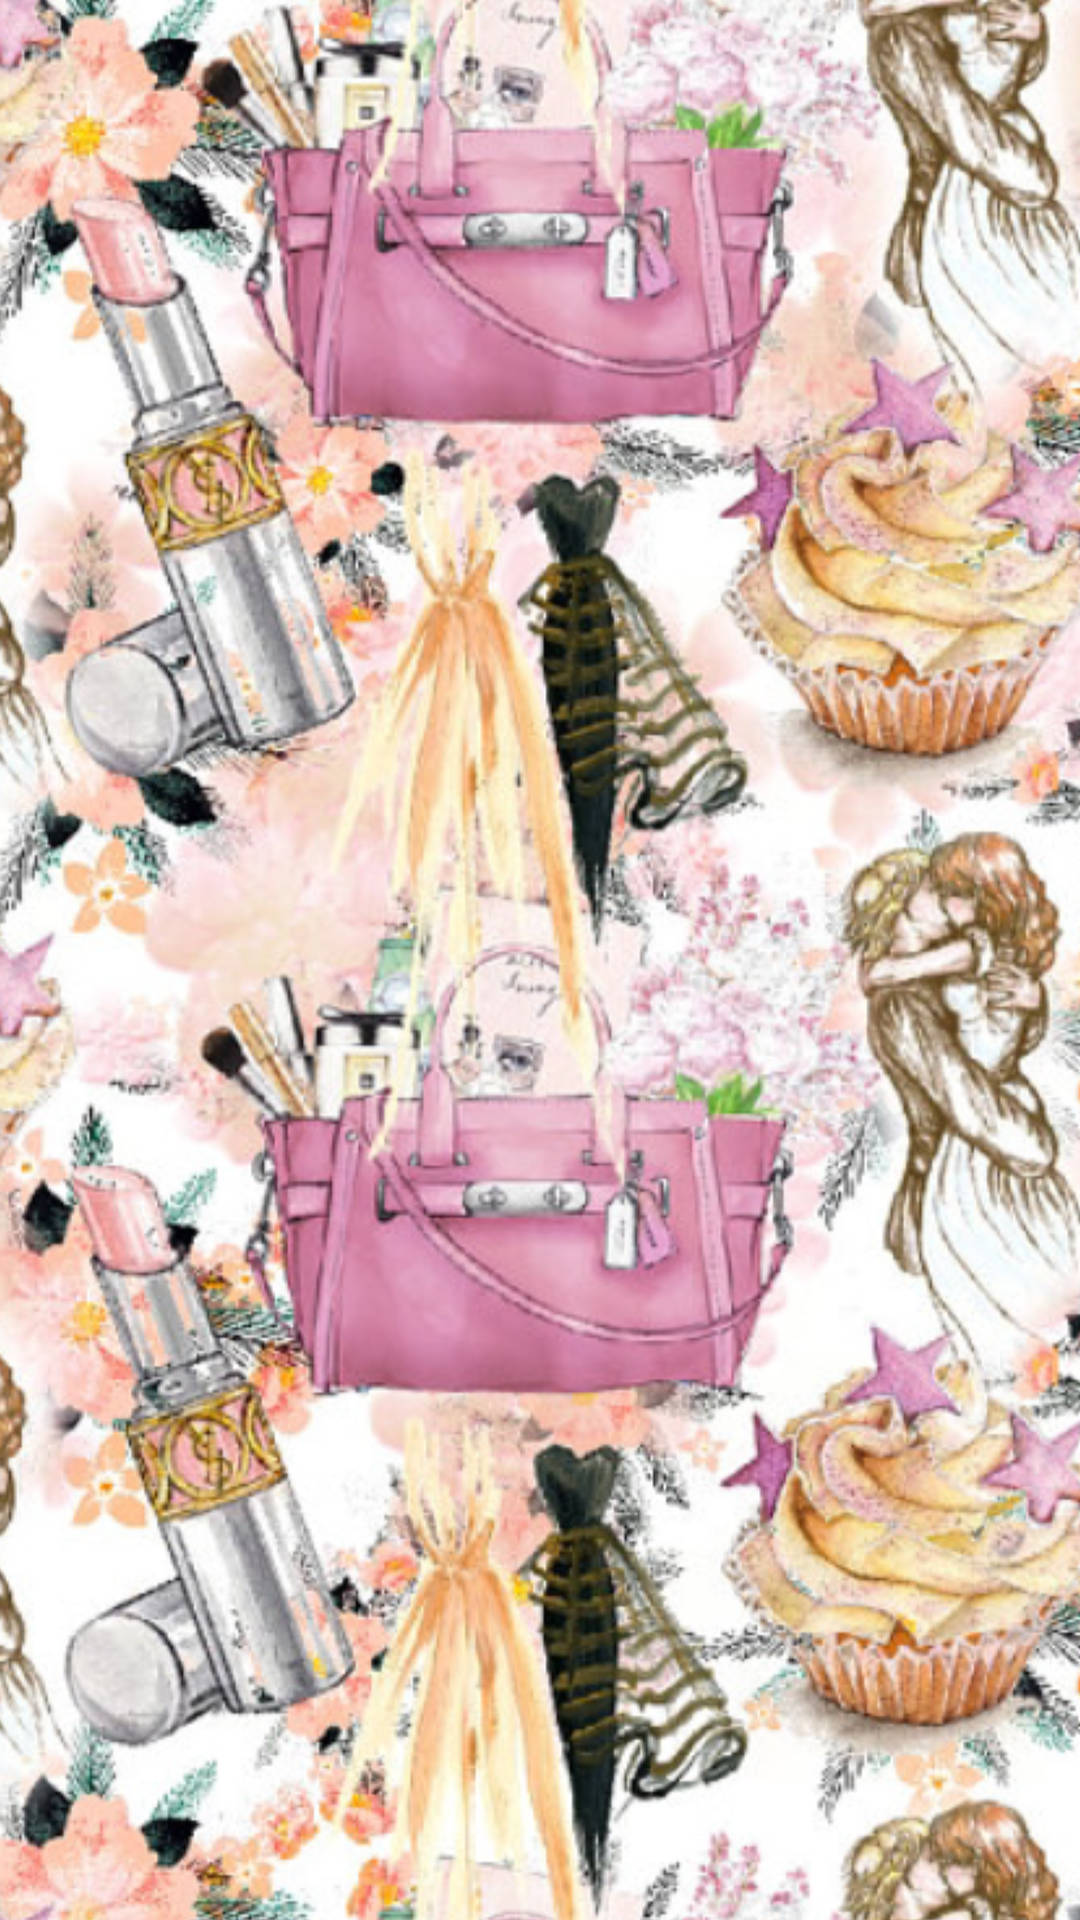 Show off your feminine style with this chic pink fashion illustration. Wallpaper